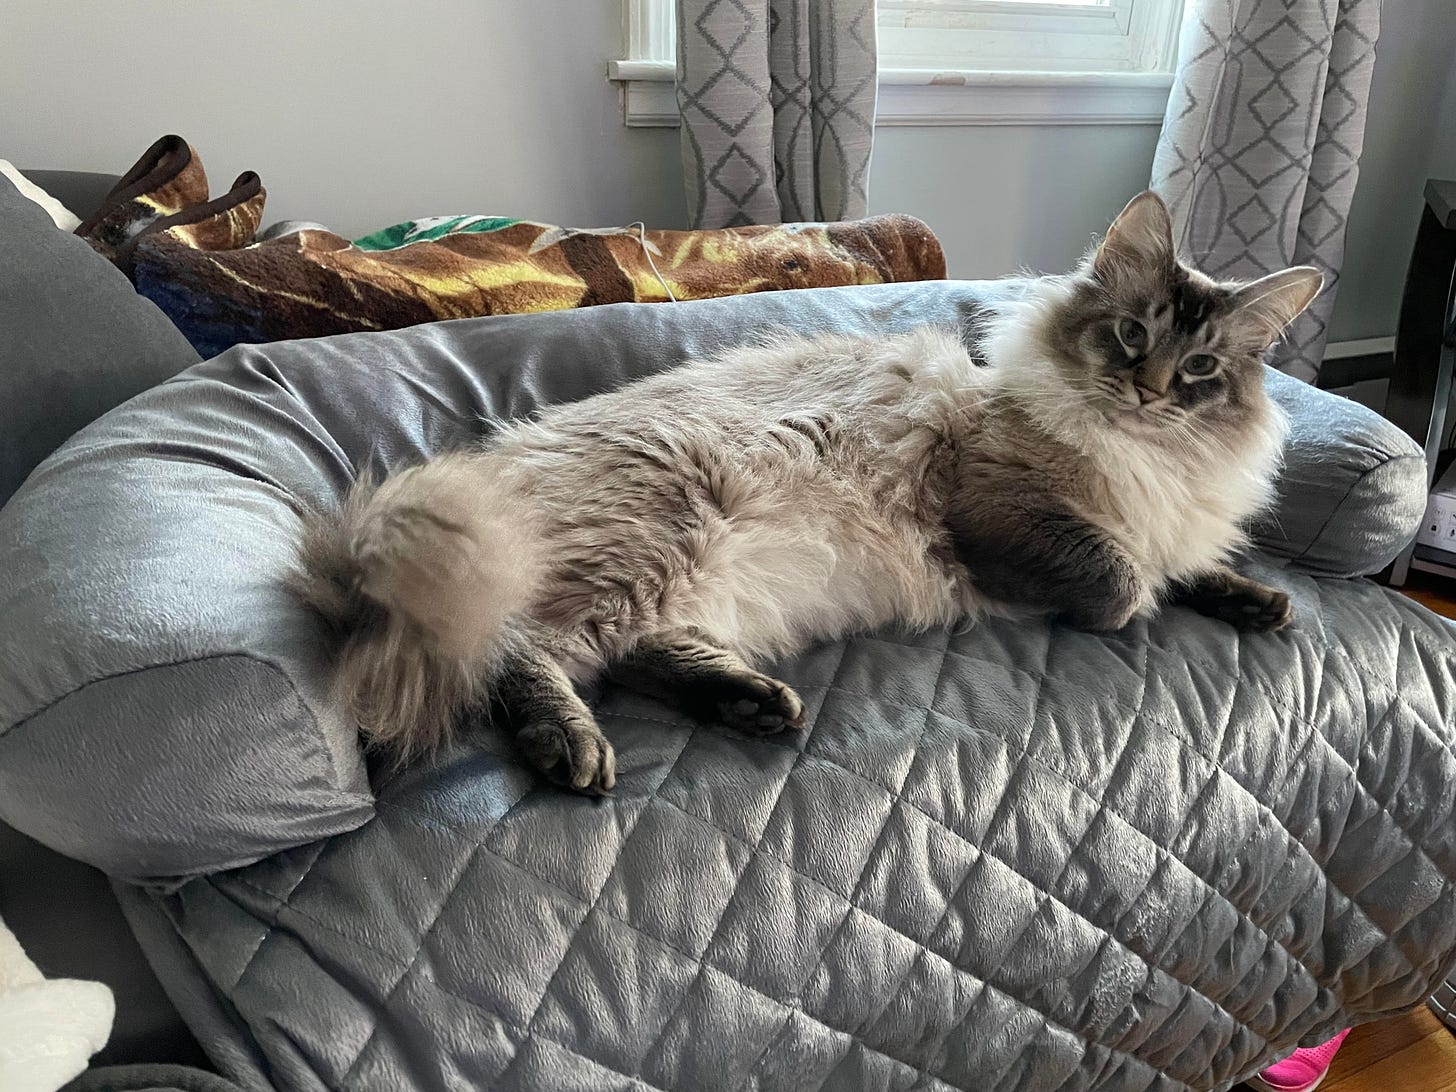 A fluffy cat lays on a small cat couch, looking towards the camera.